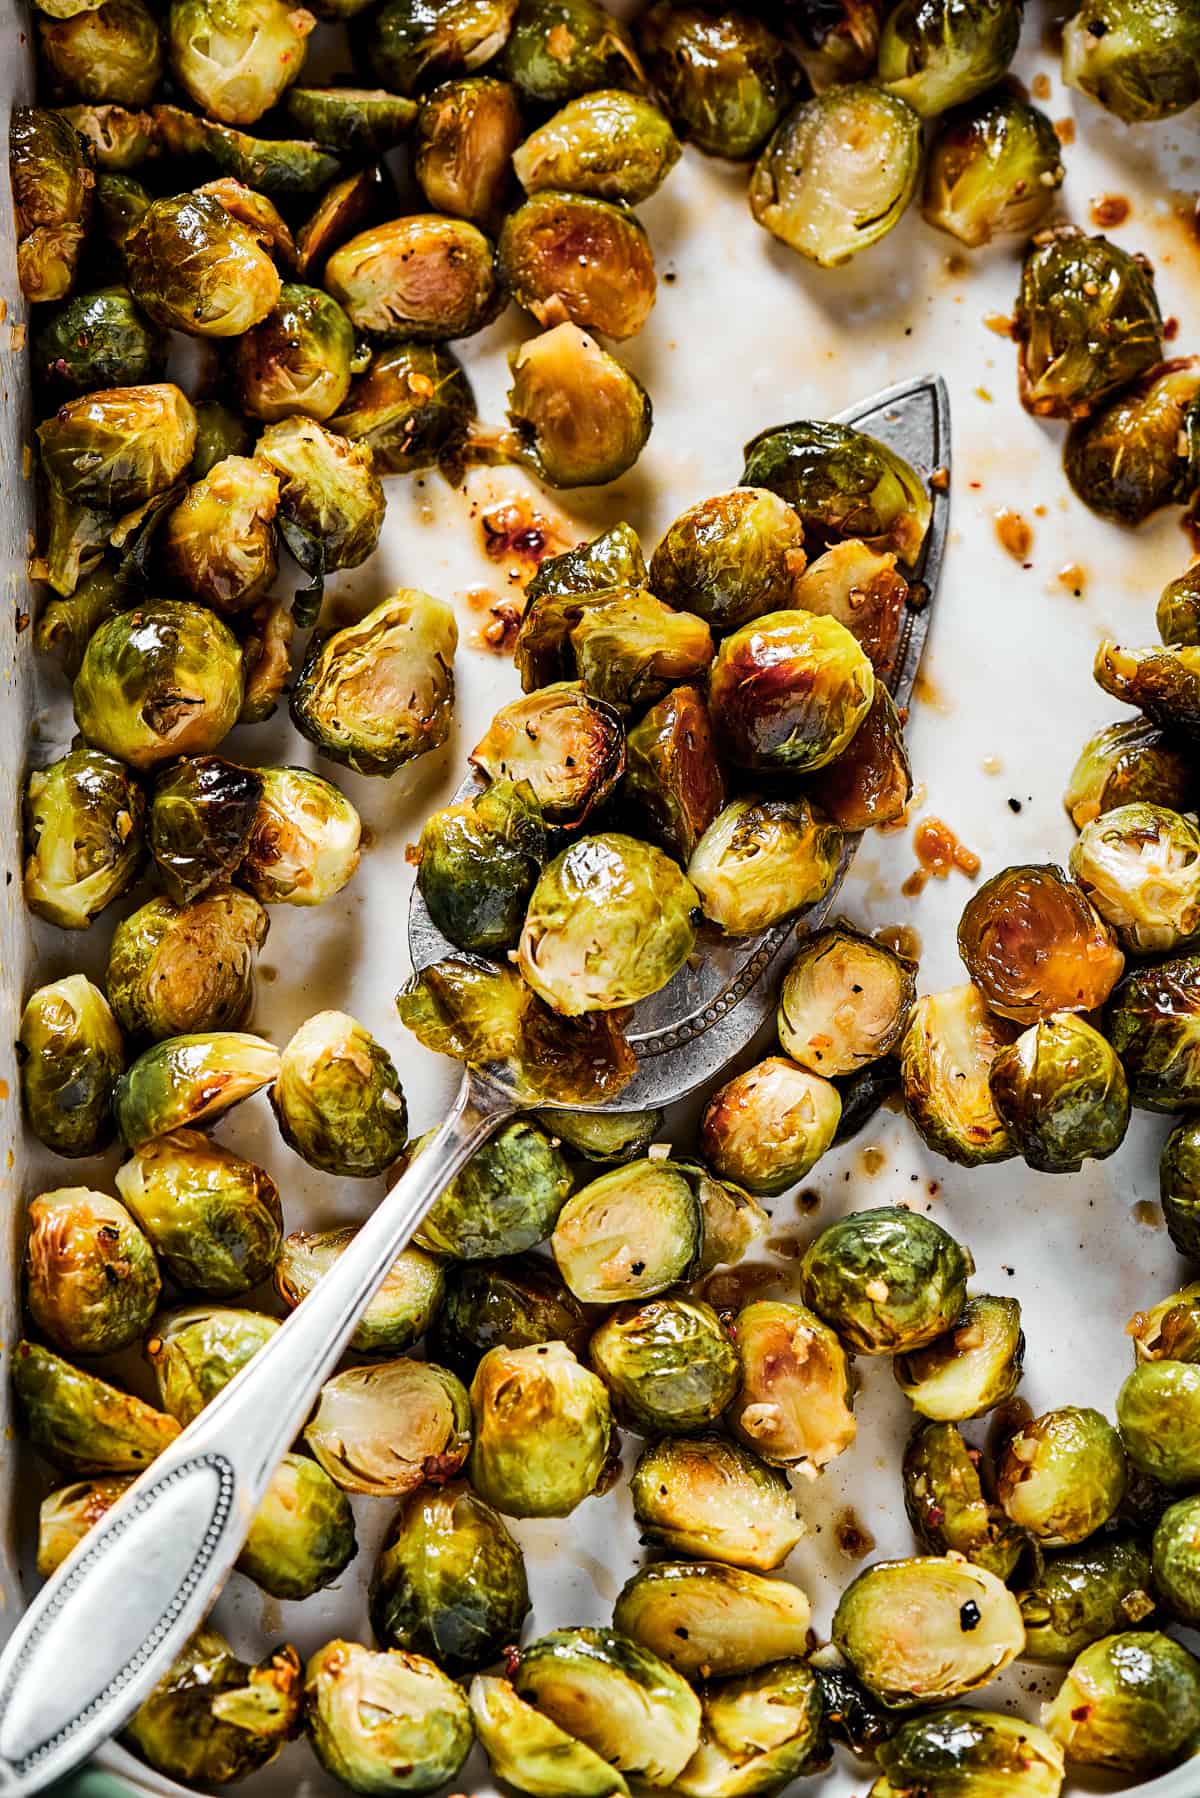 Tossing roasted brussels sprouts with glaze.